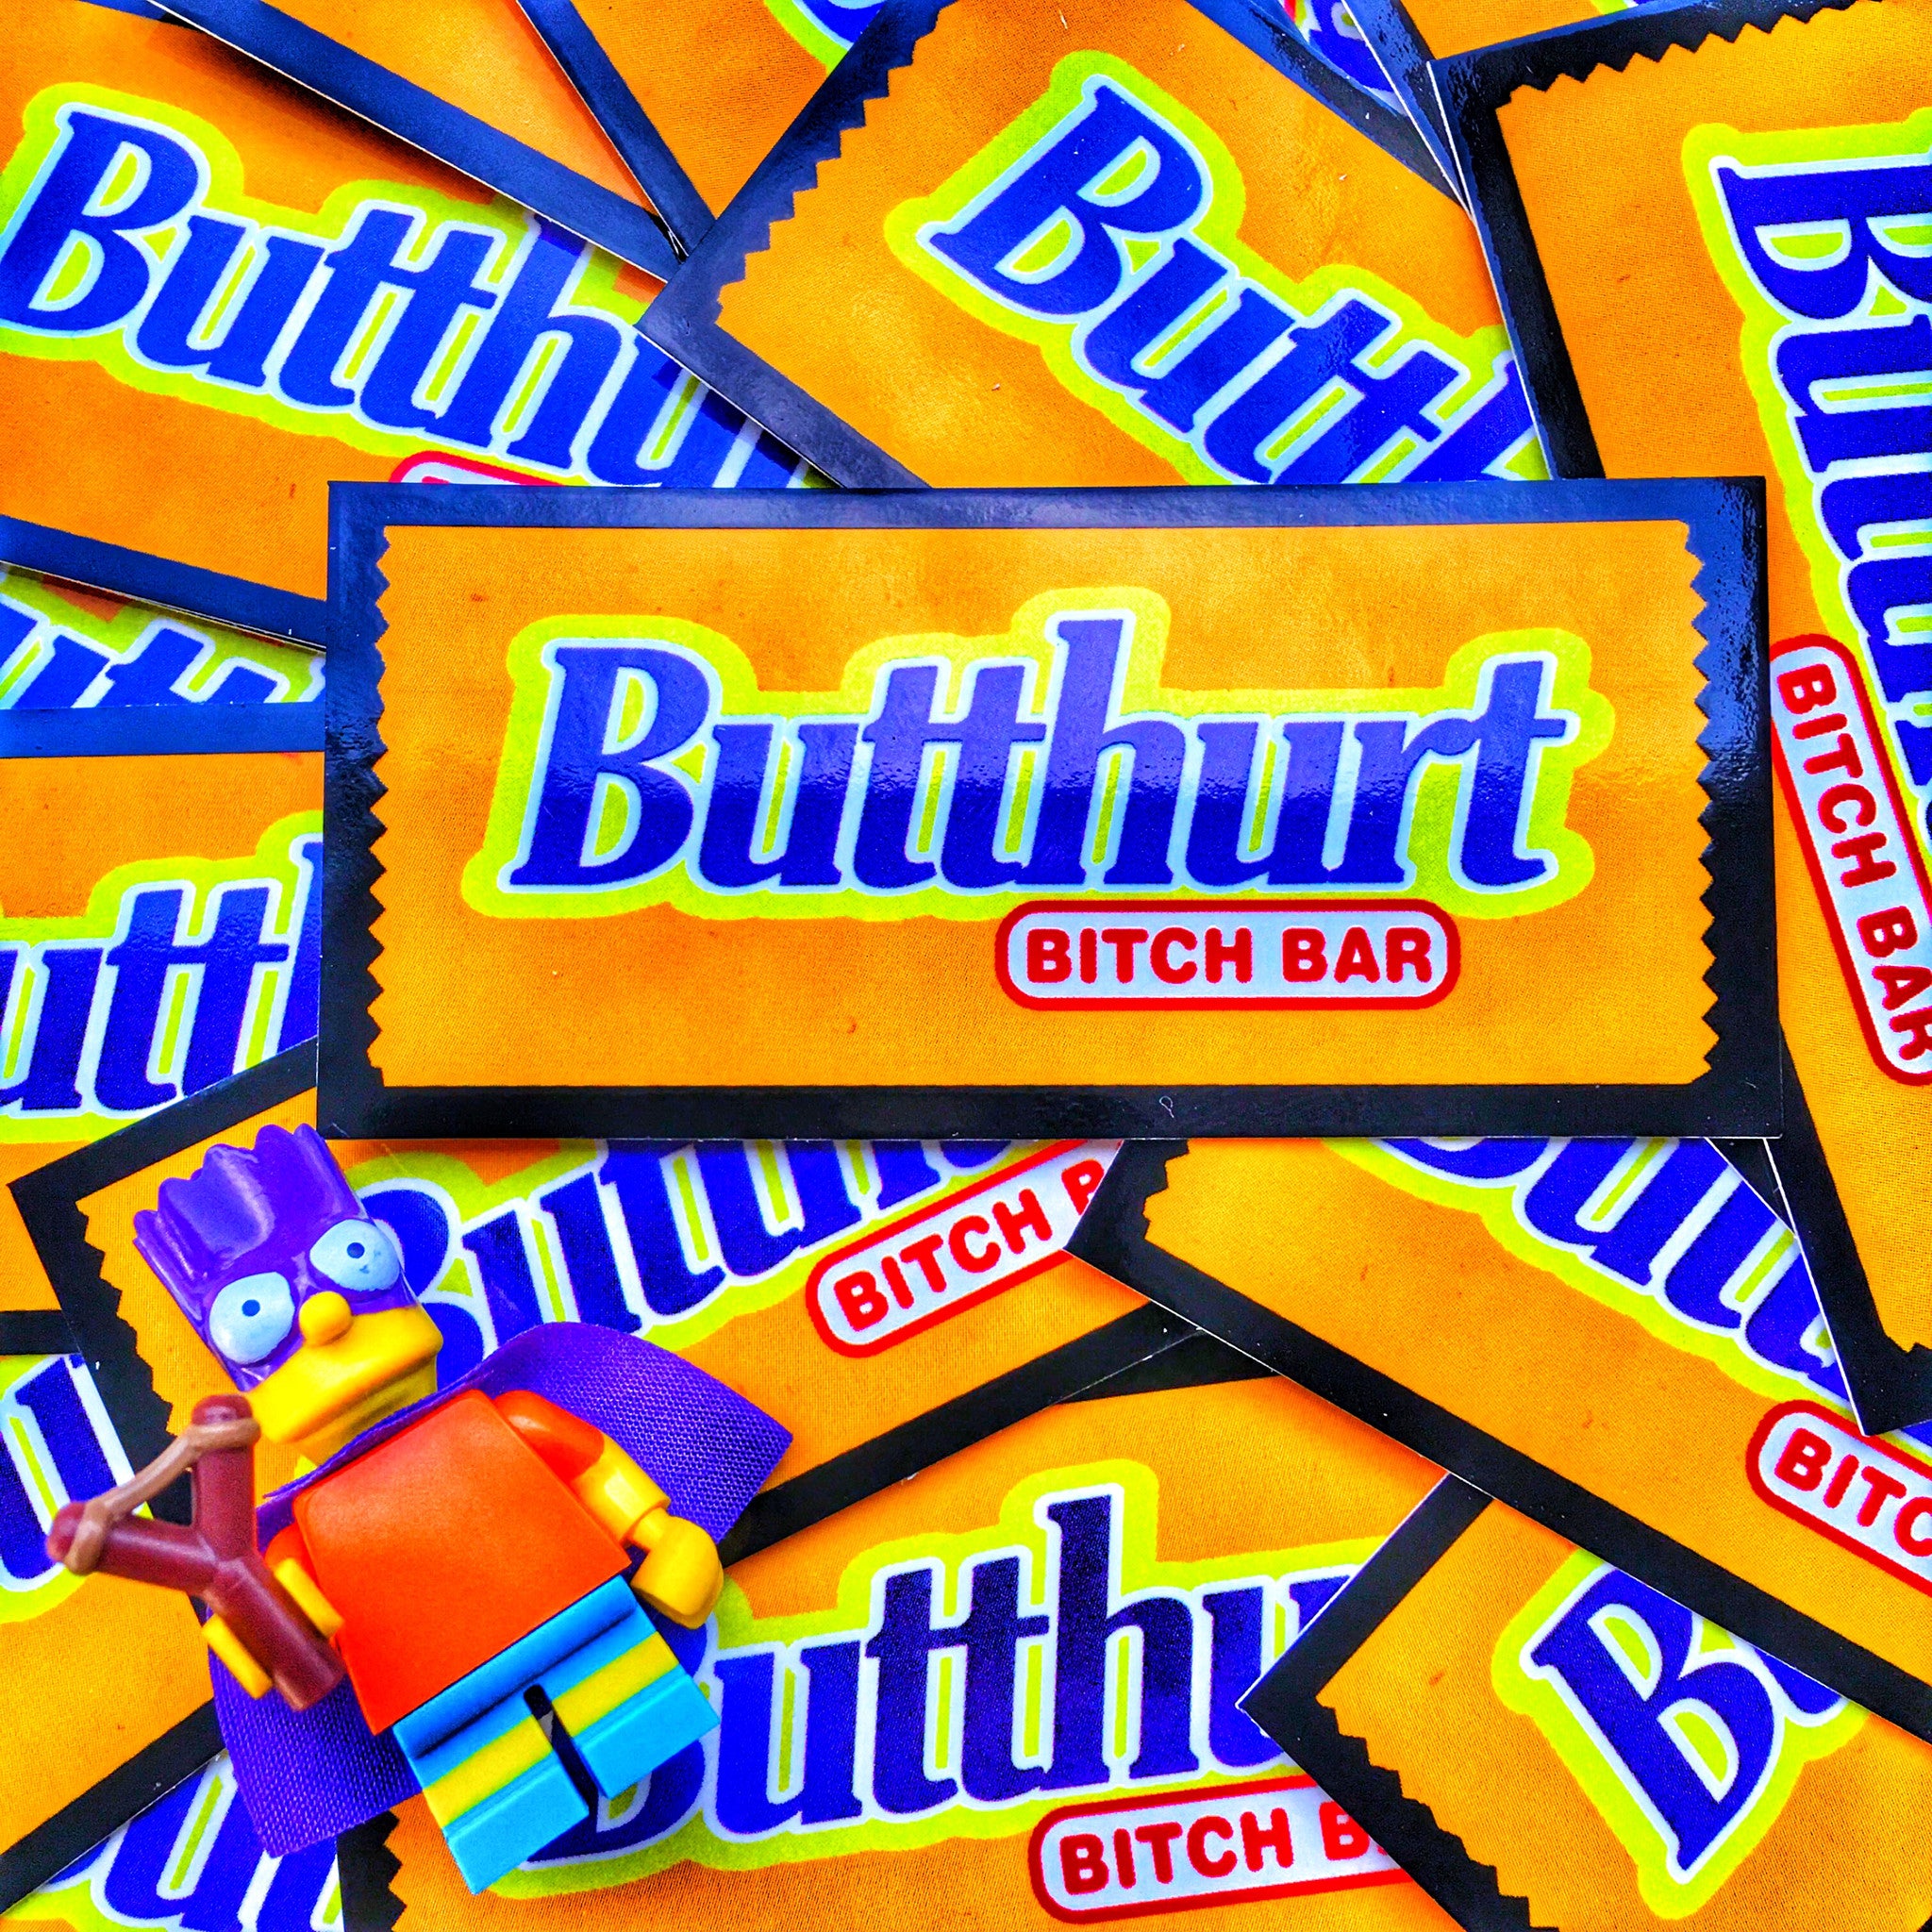 Yellow and blue candy bar shaped vinyl sticker with text that reads Butthurt bitch bar 